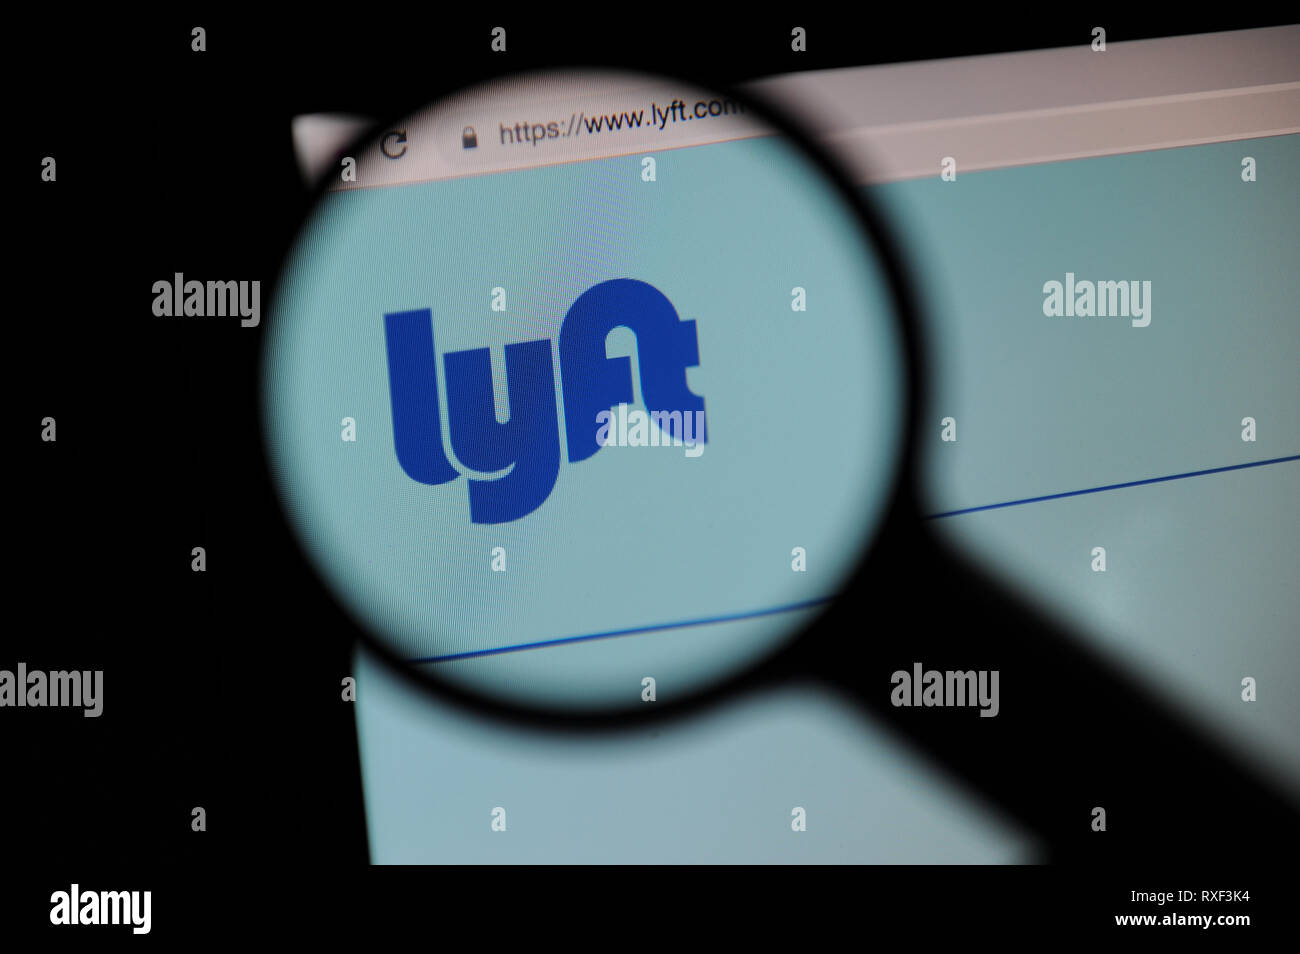 Lyft website seen through a magnifying glass, Lyft is a ride sharing company based in the US. Stock Photo